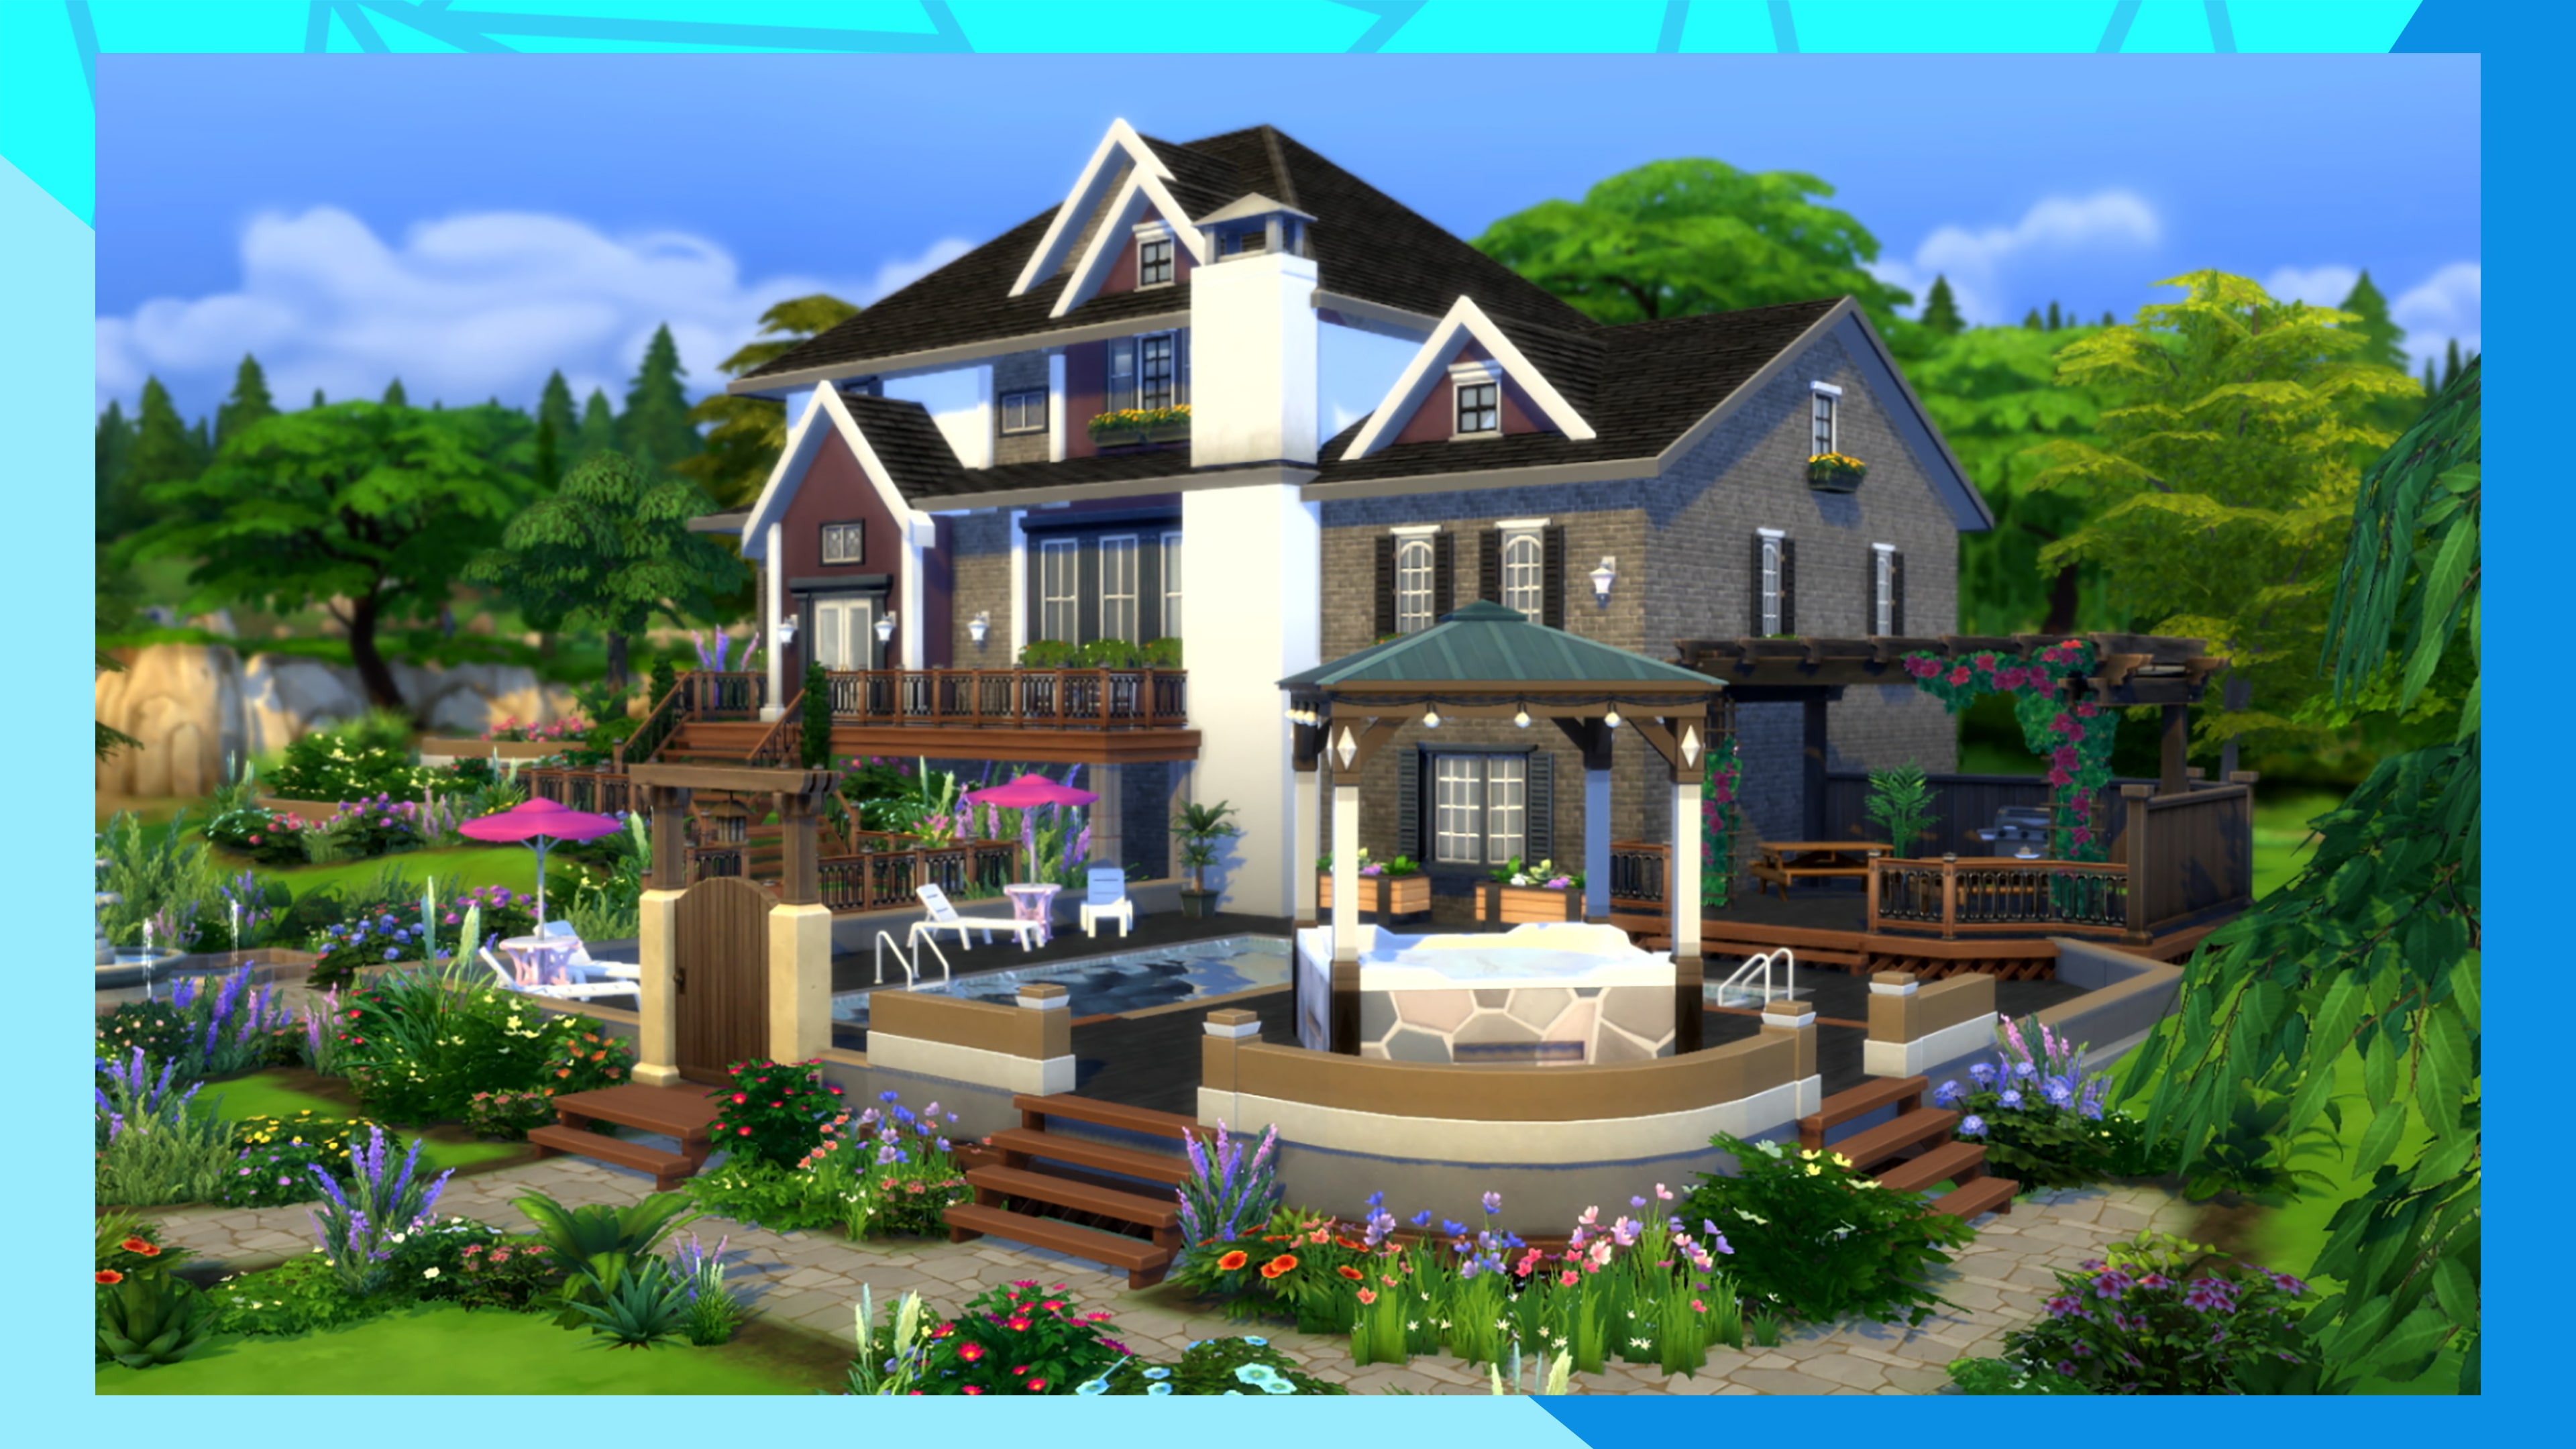 Buy The Sims™ 4 Cottage Living Expansion Pack - Electronic Arts